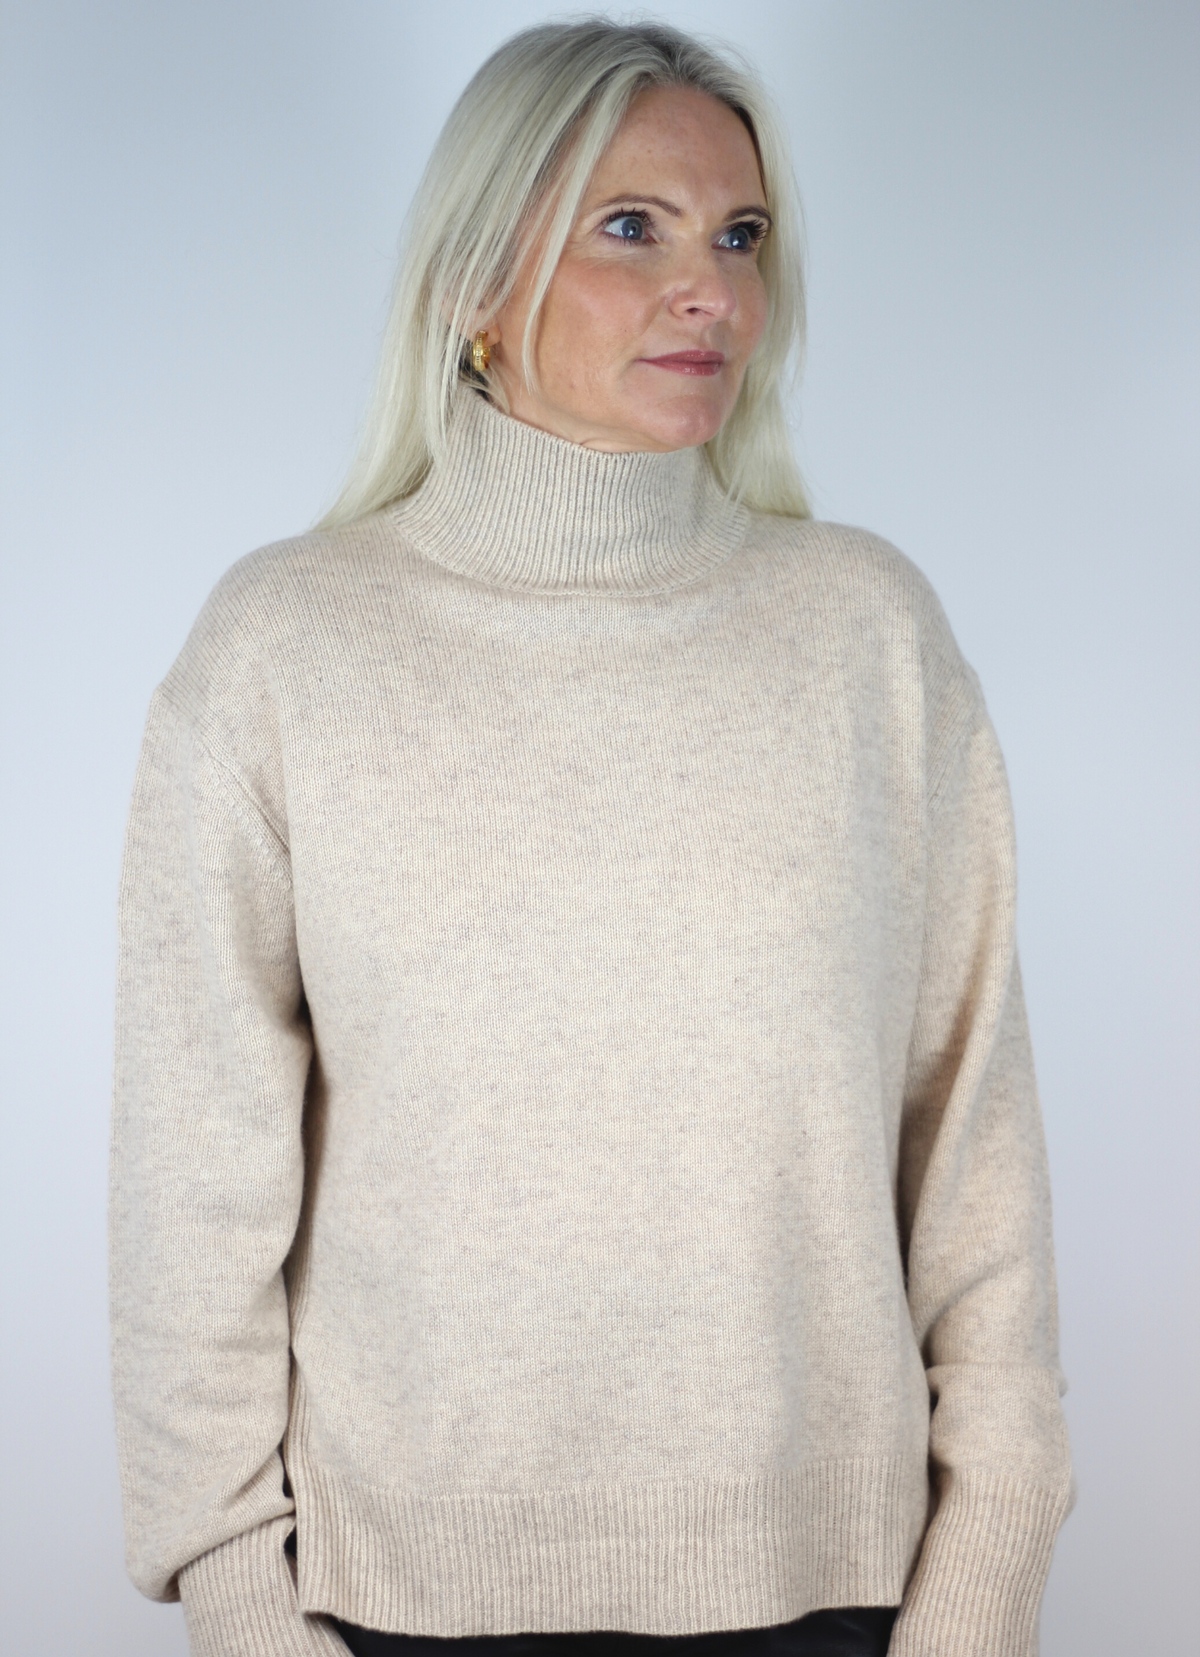 Loose fitting in a boxy style with long sleeves and a ribbed cuff in a gorgeous soft oatmeal colour way, this jumper will look fantastic with denim, trousers or a skirt. 